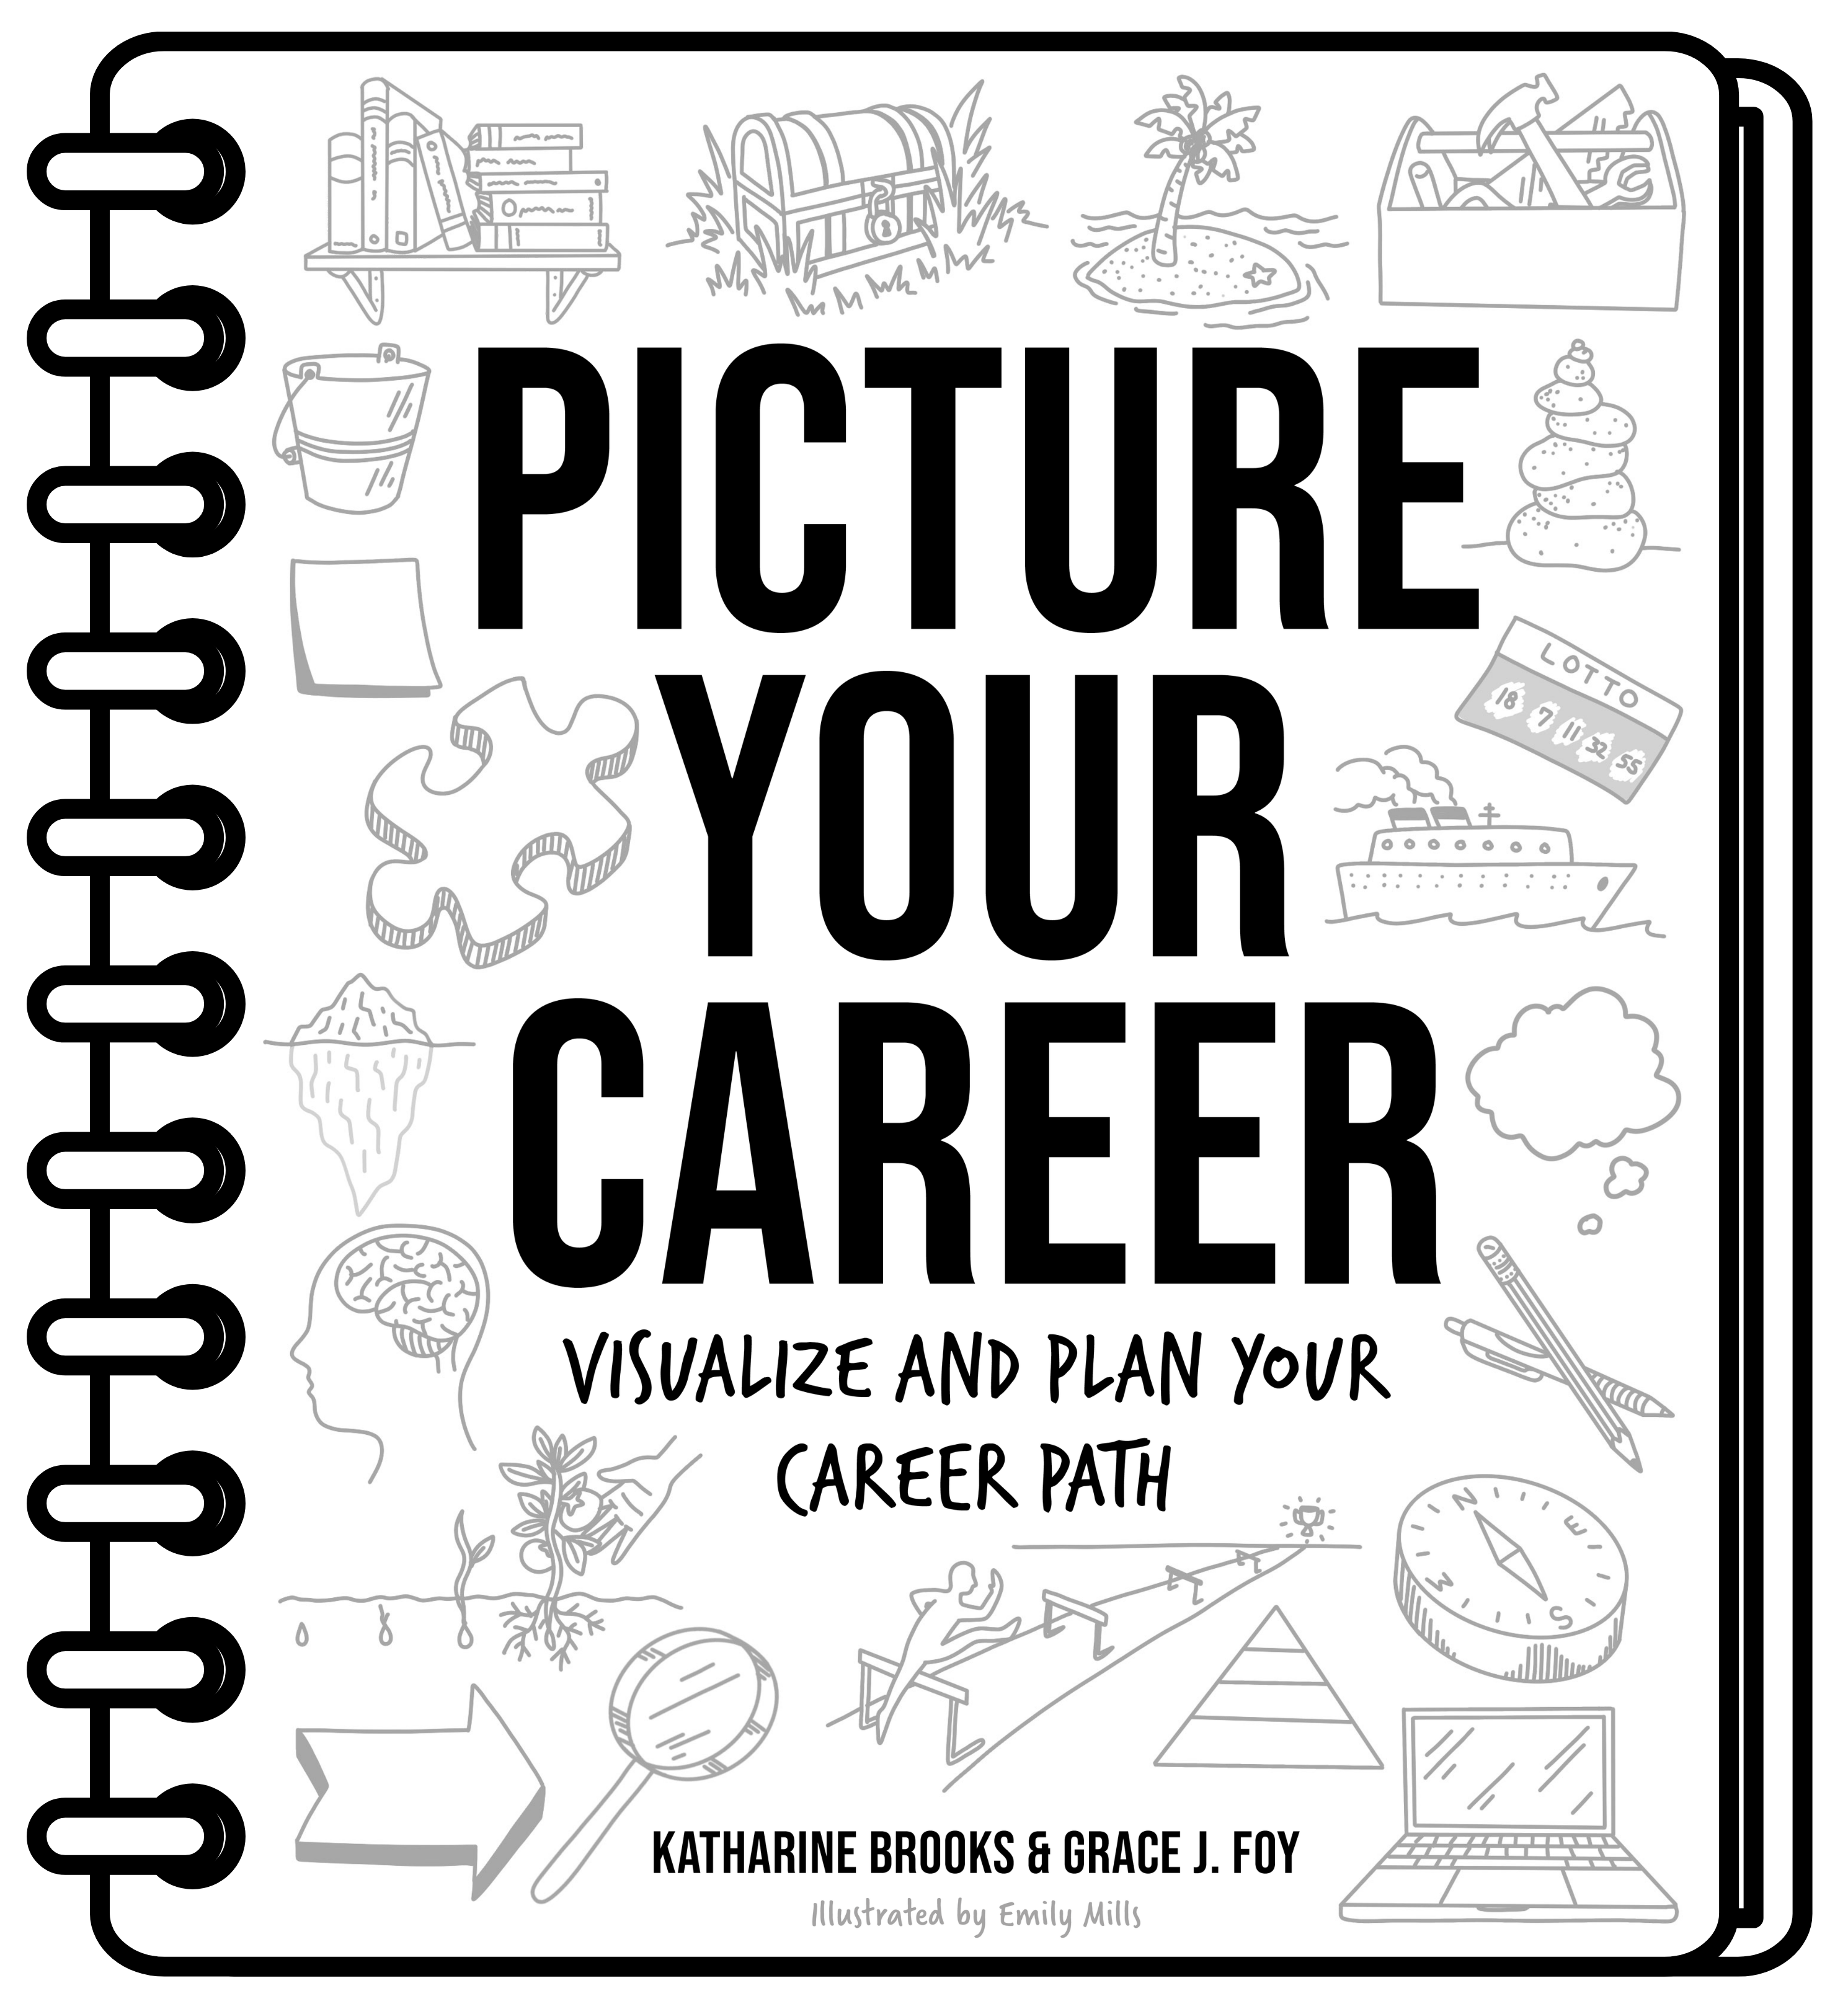 picture of Picture Your Career's workbook cover